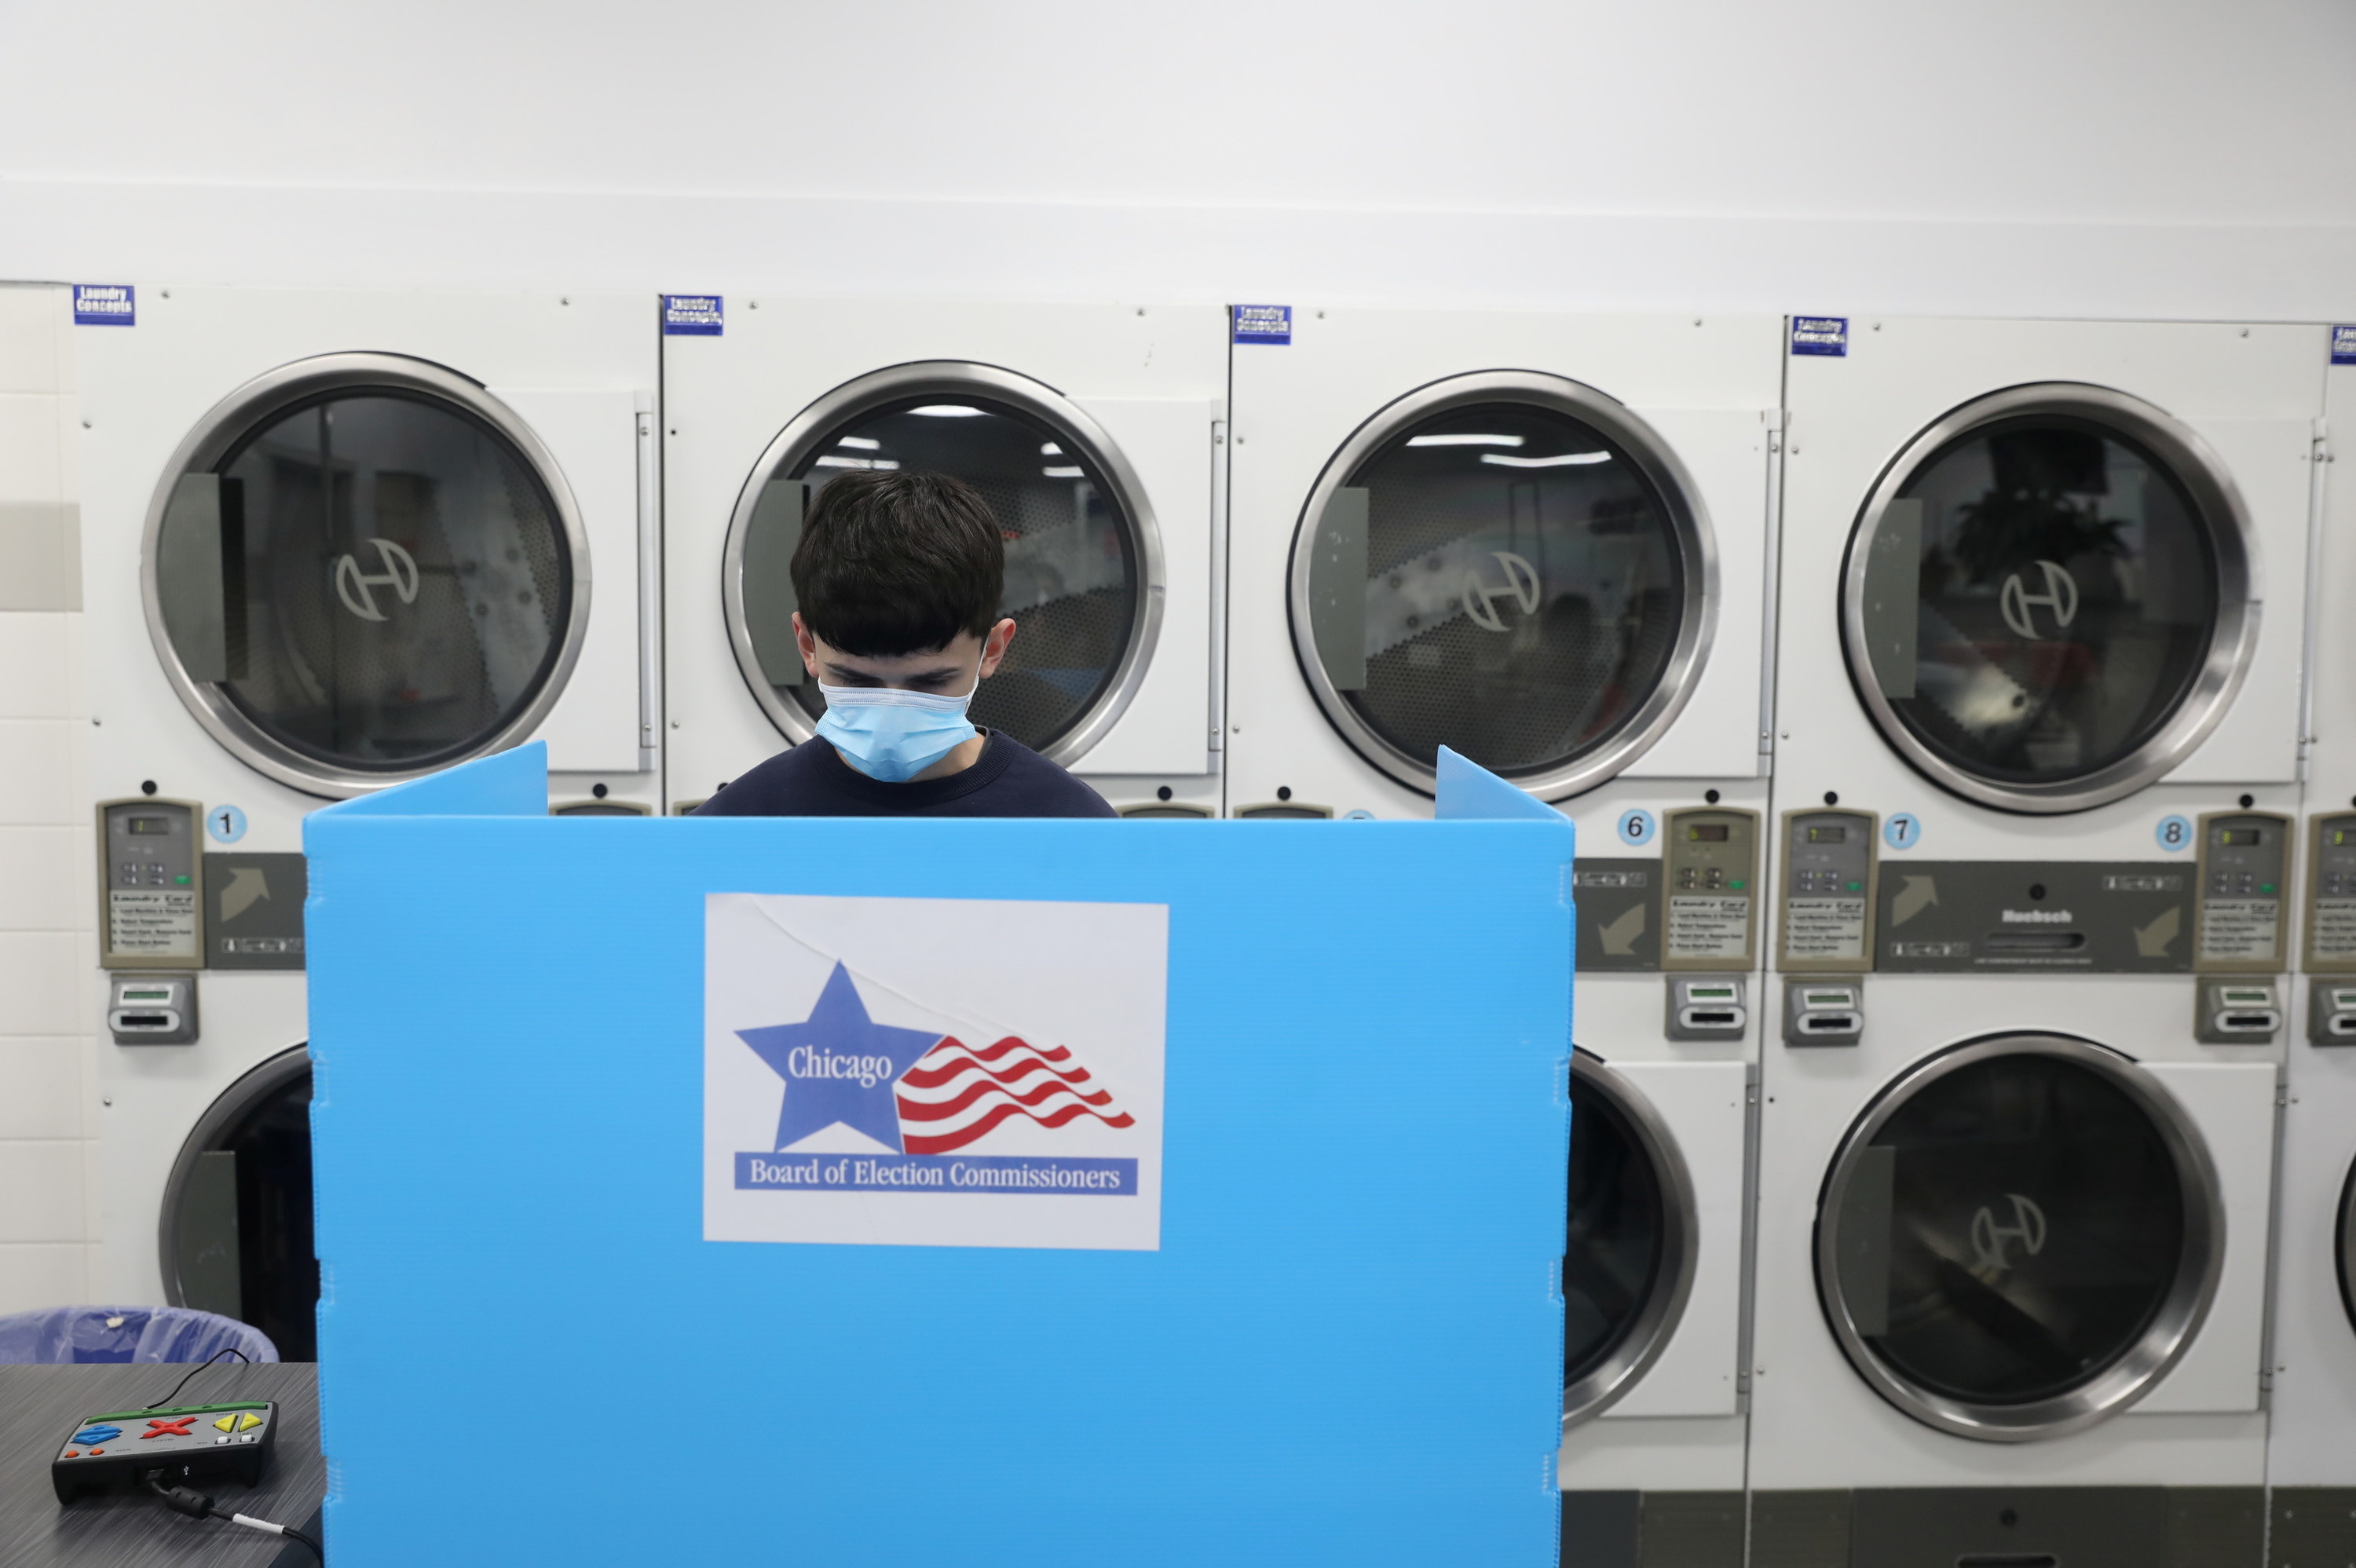 Man voting at a laundromat. 